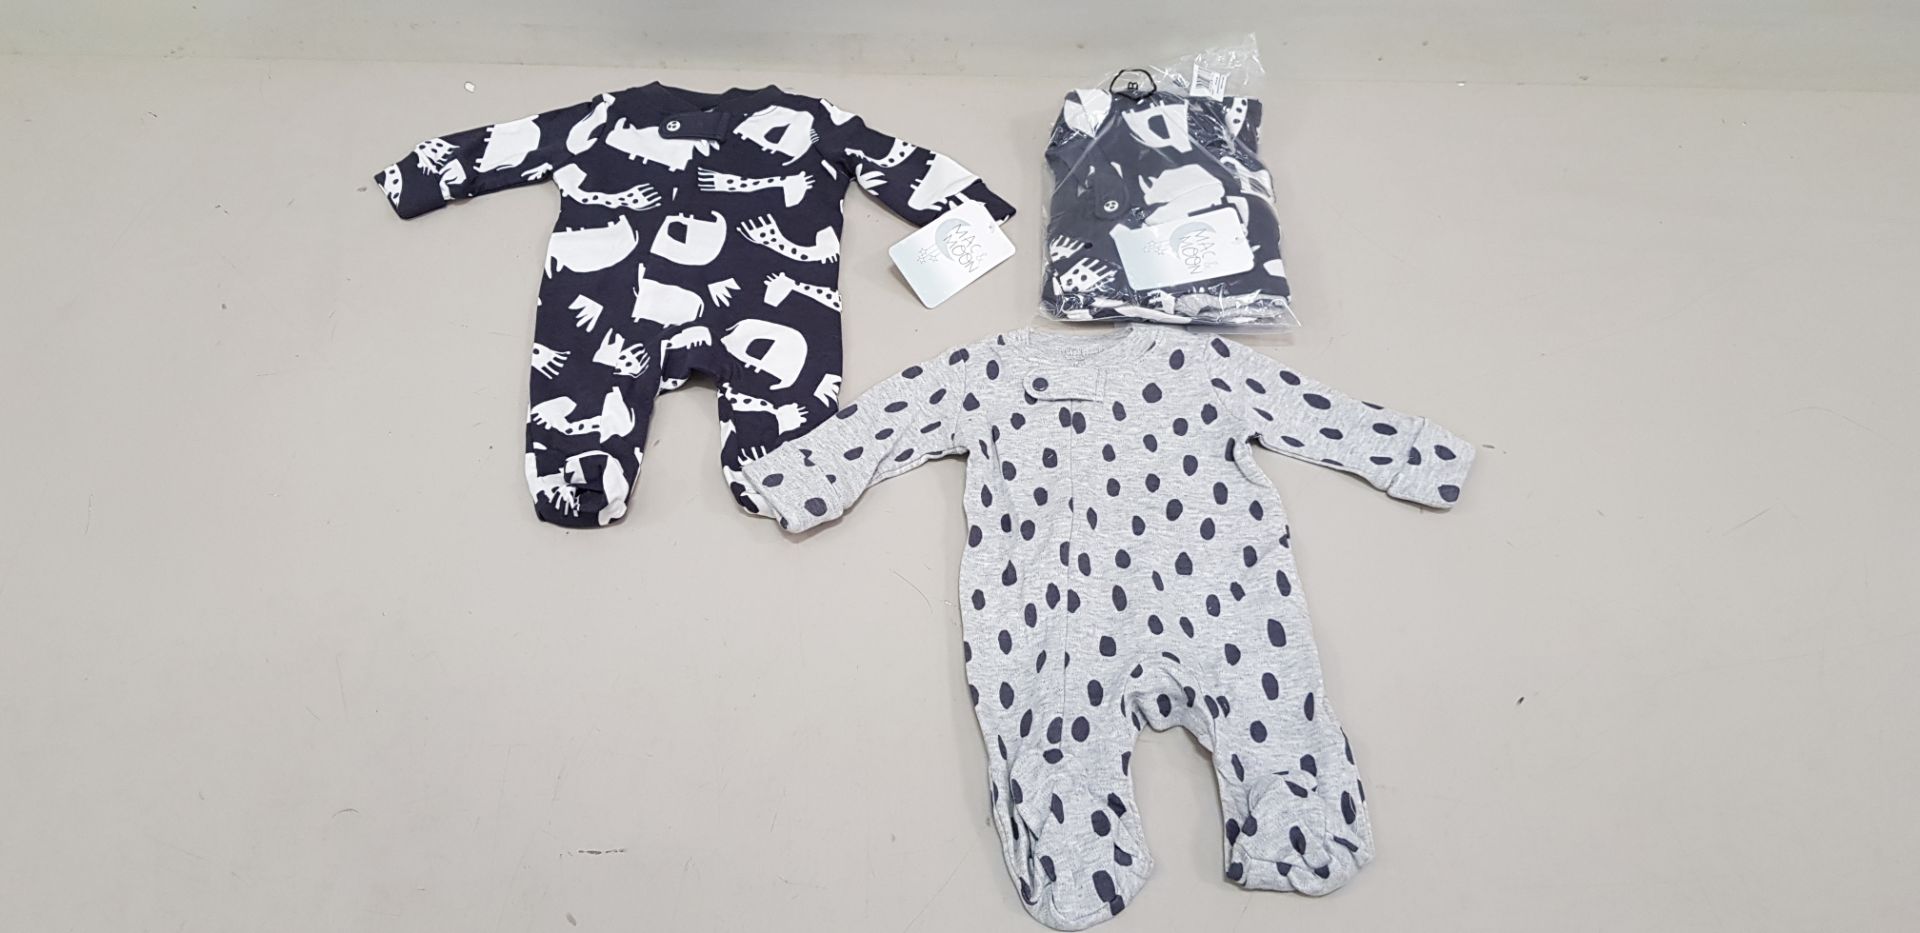 30 X BRAND NEW MAC AND MOON 2 PACK OF BABY GROWS UK SIZE 9 MONTHS